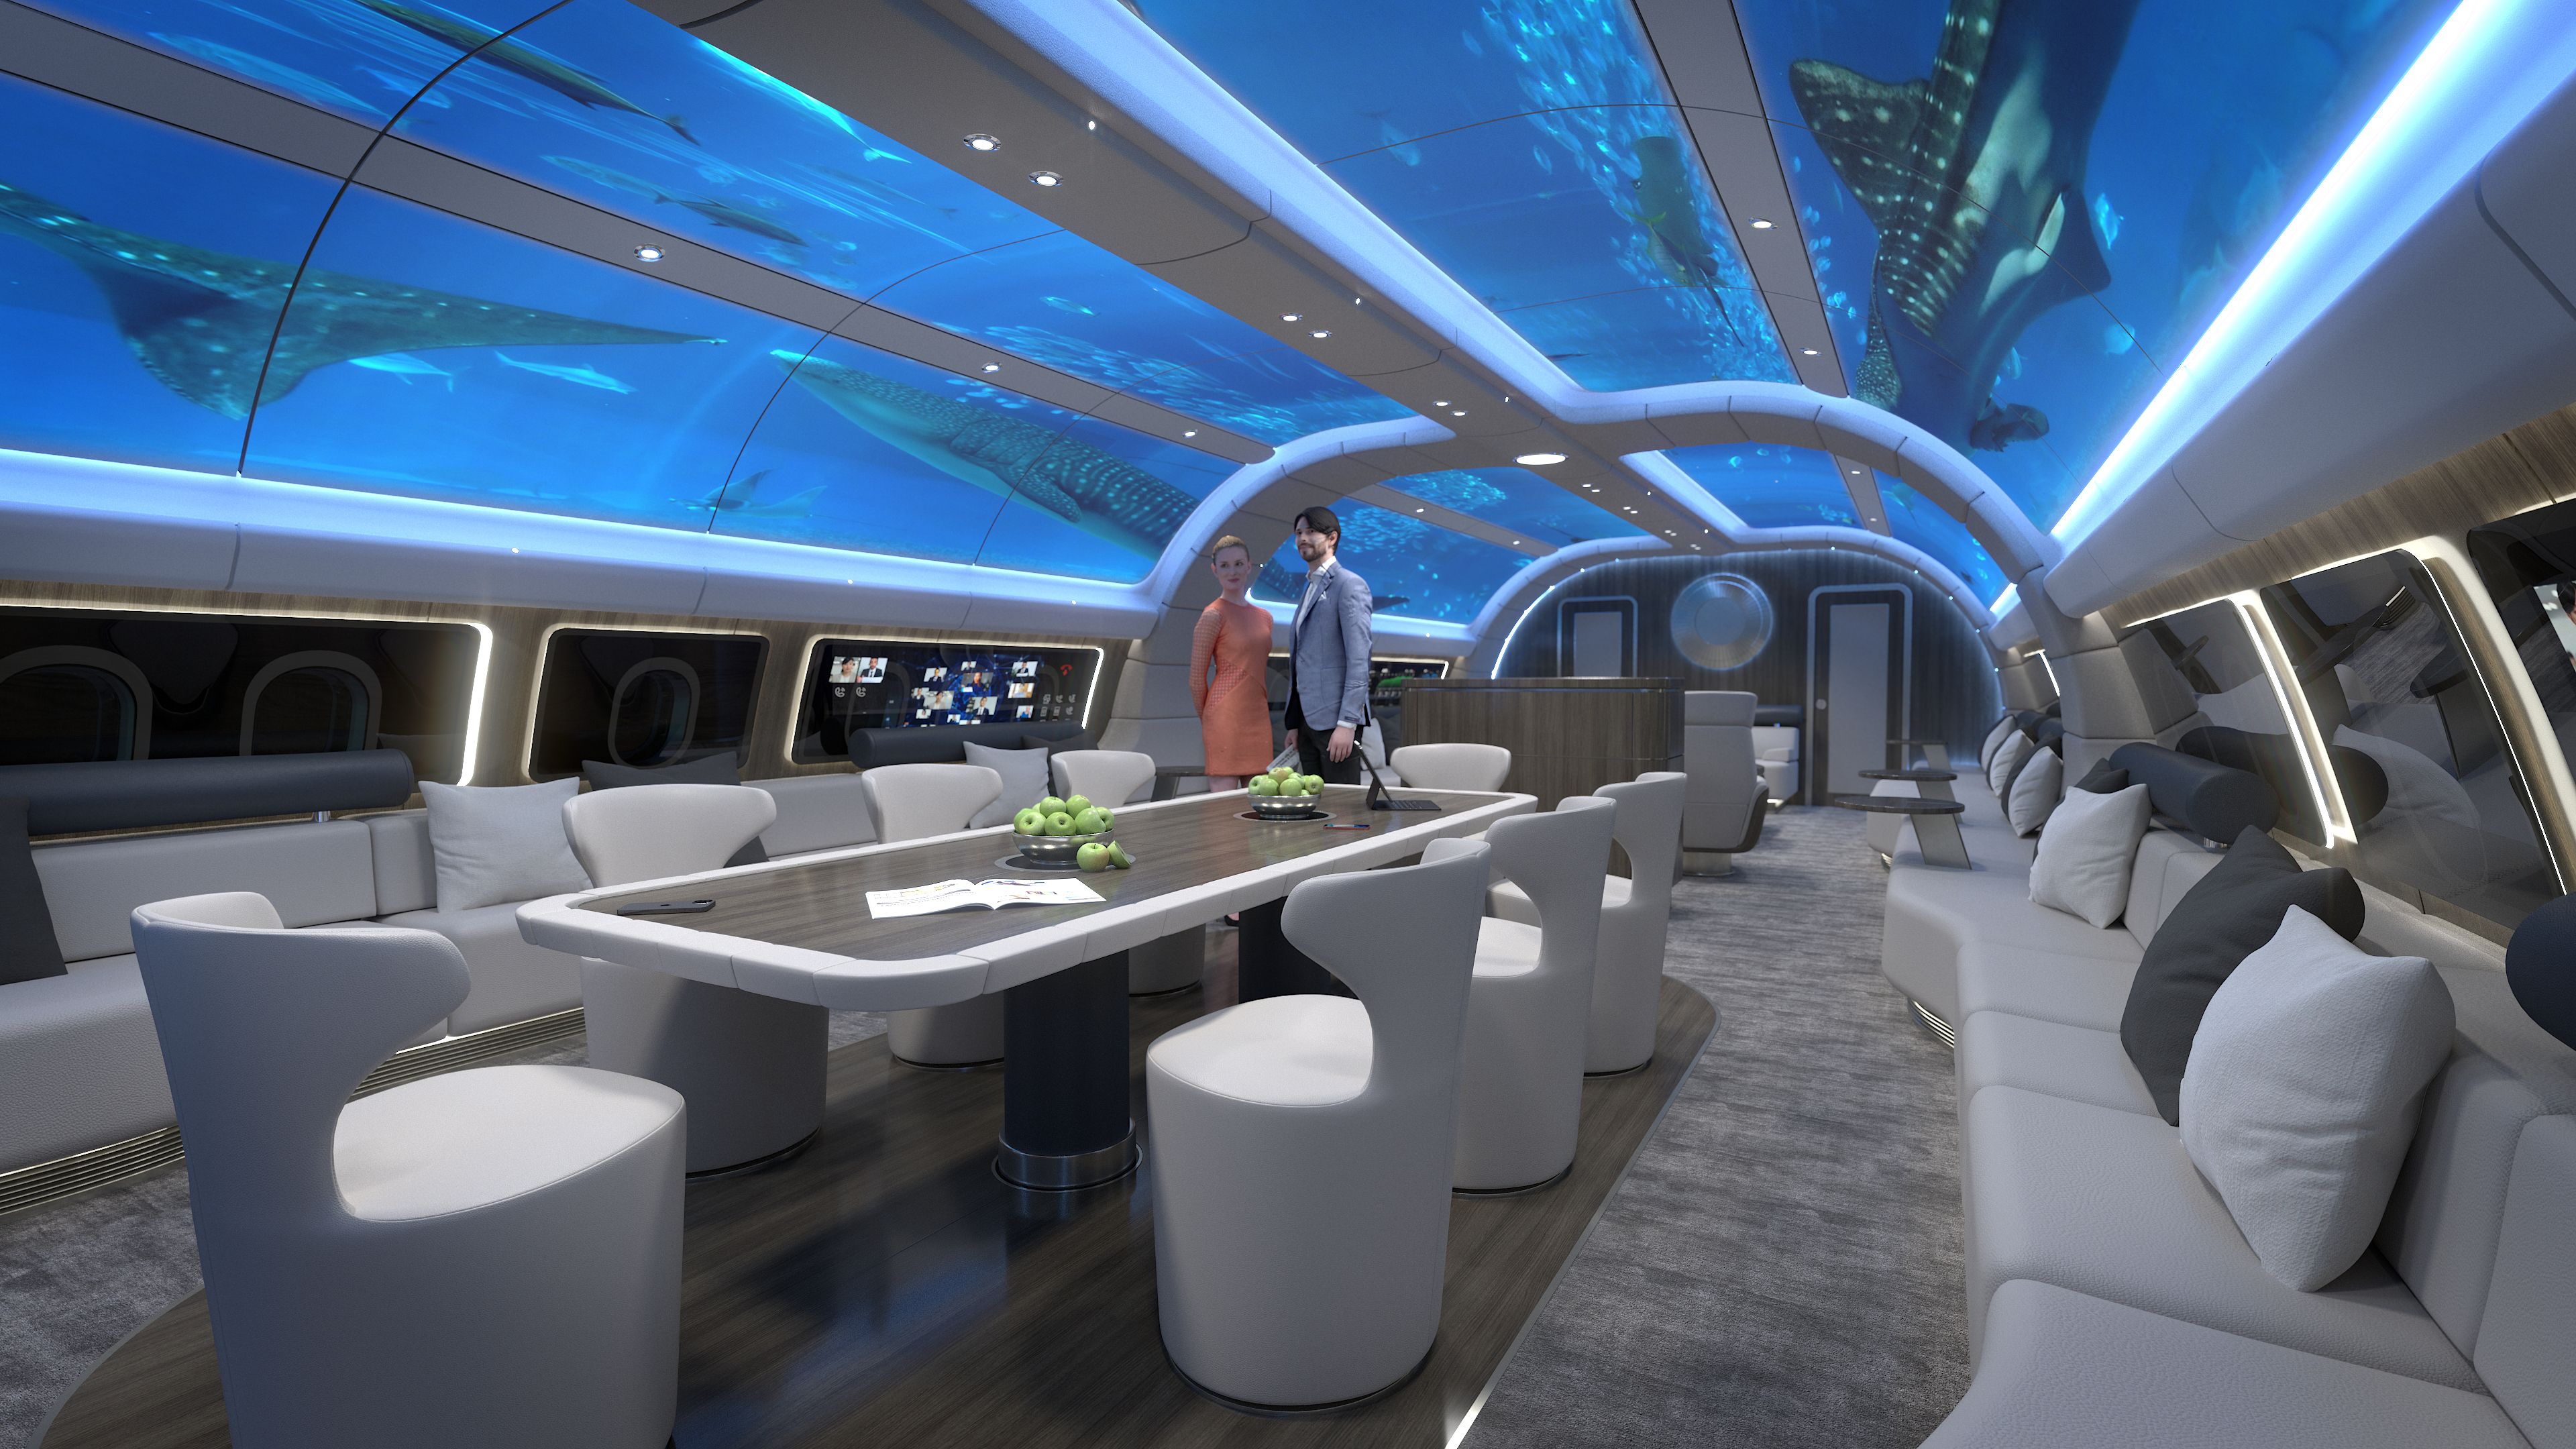 Travel news: Airplane cabin innovations from saunas to sleeping pods